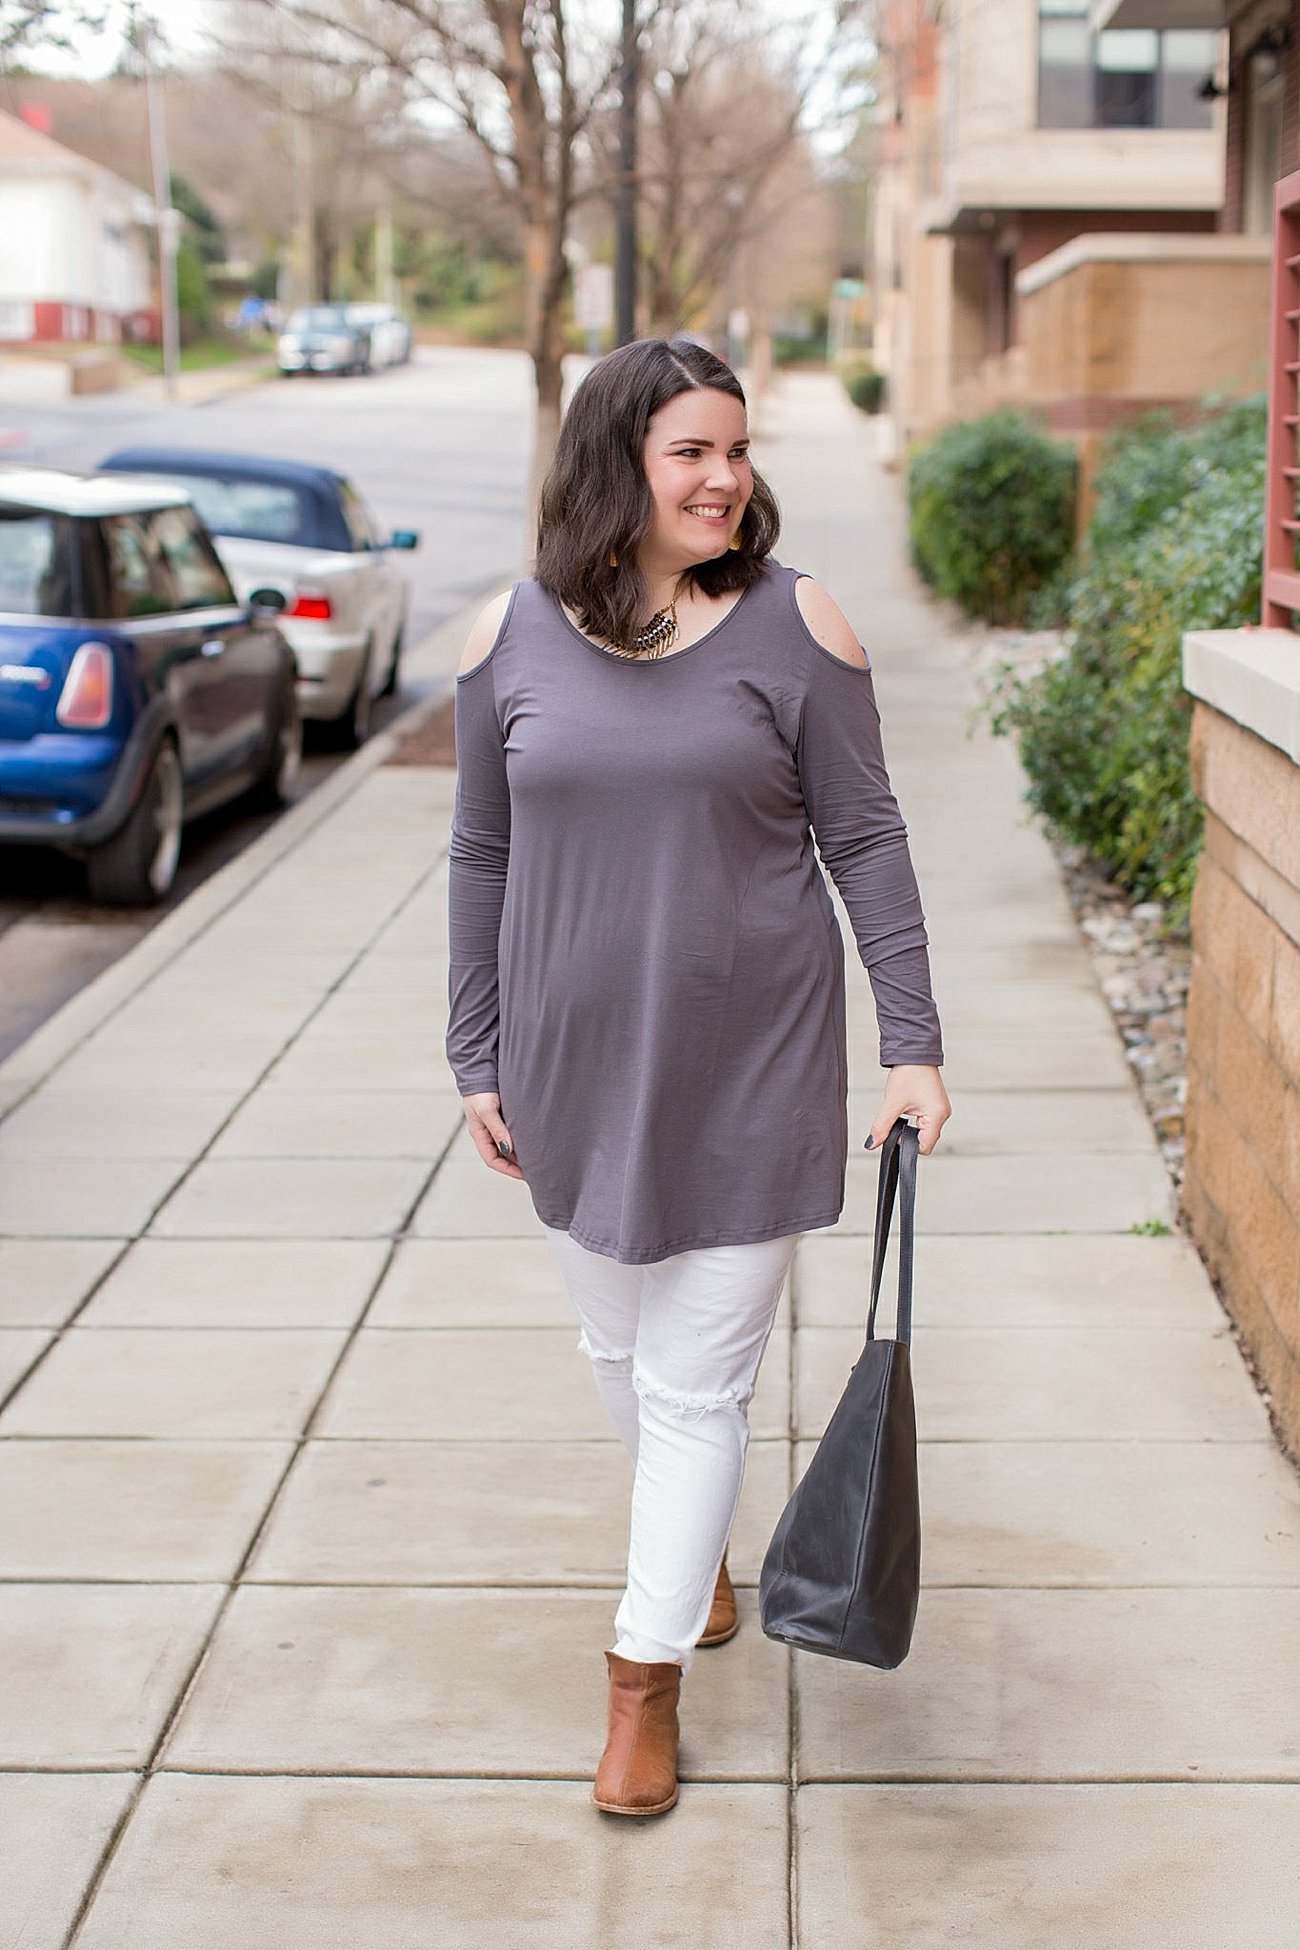 Elegantees cold shoulder tunic, The Flourish Market, Sseko Designs "florence" necklace, The Root Collective booties (6)